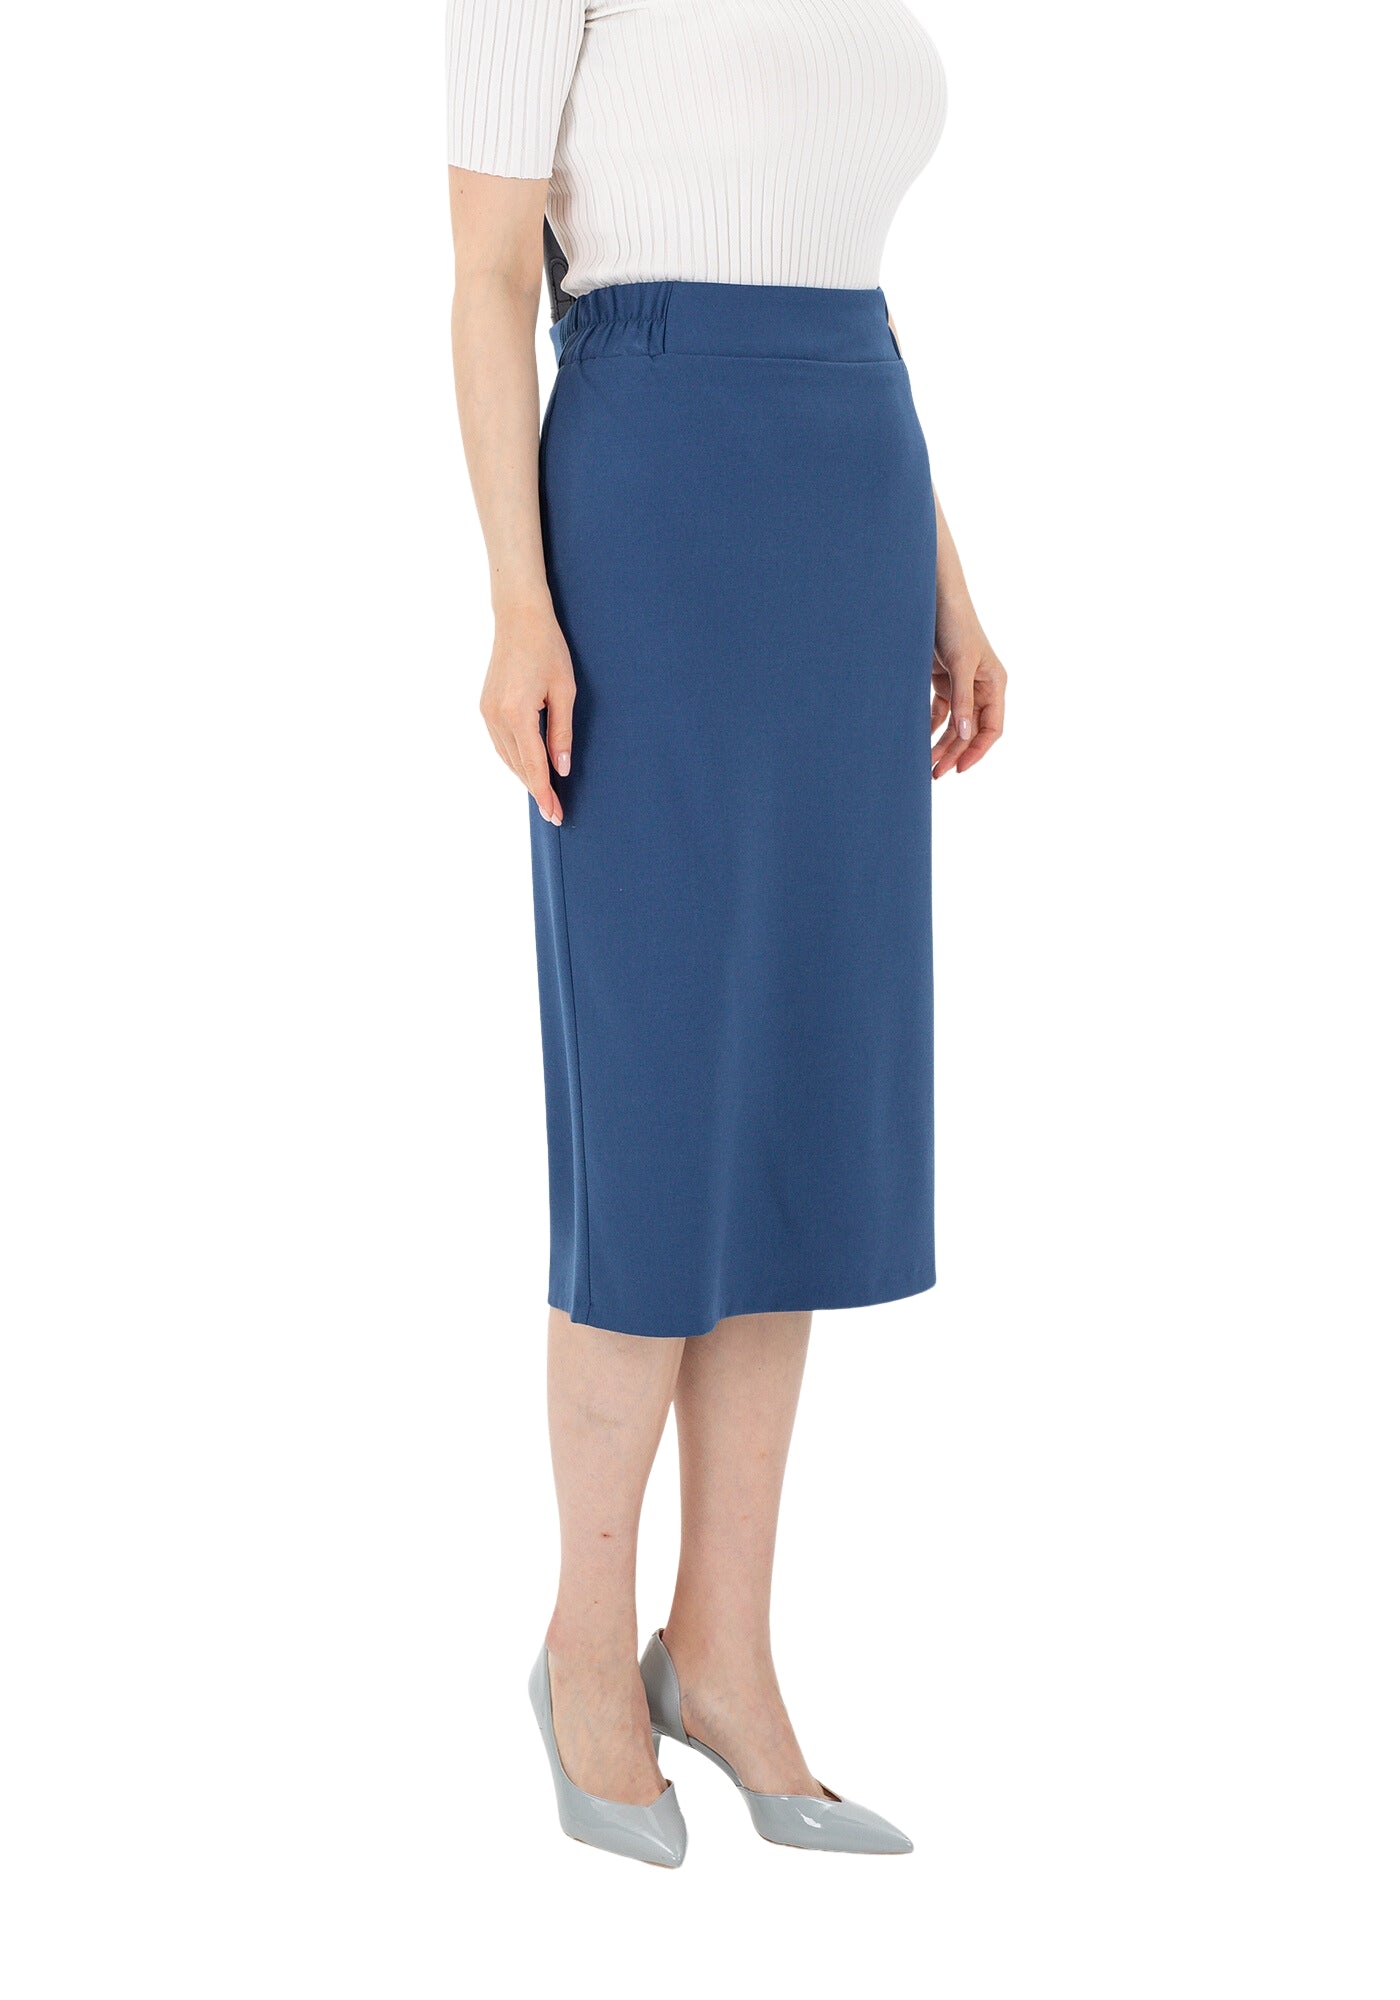 Midi Pencil Skirt with Elastic Waist and Closed Back Vent G-Line